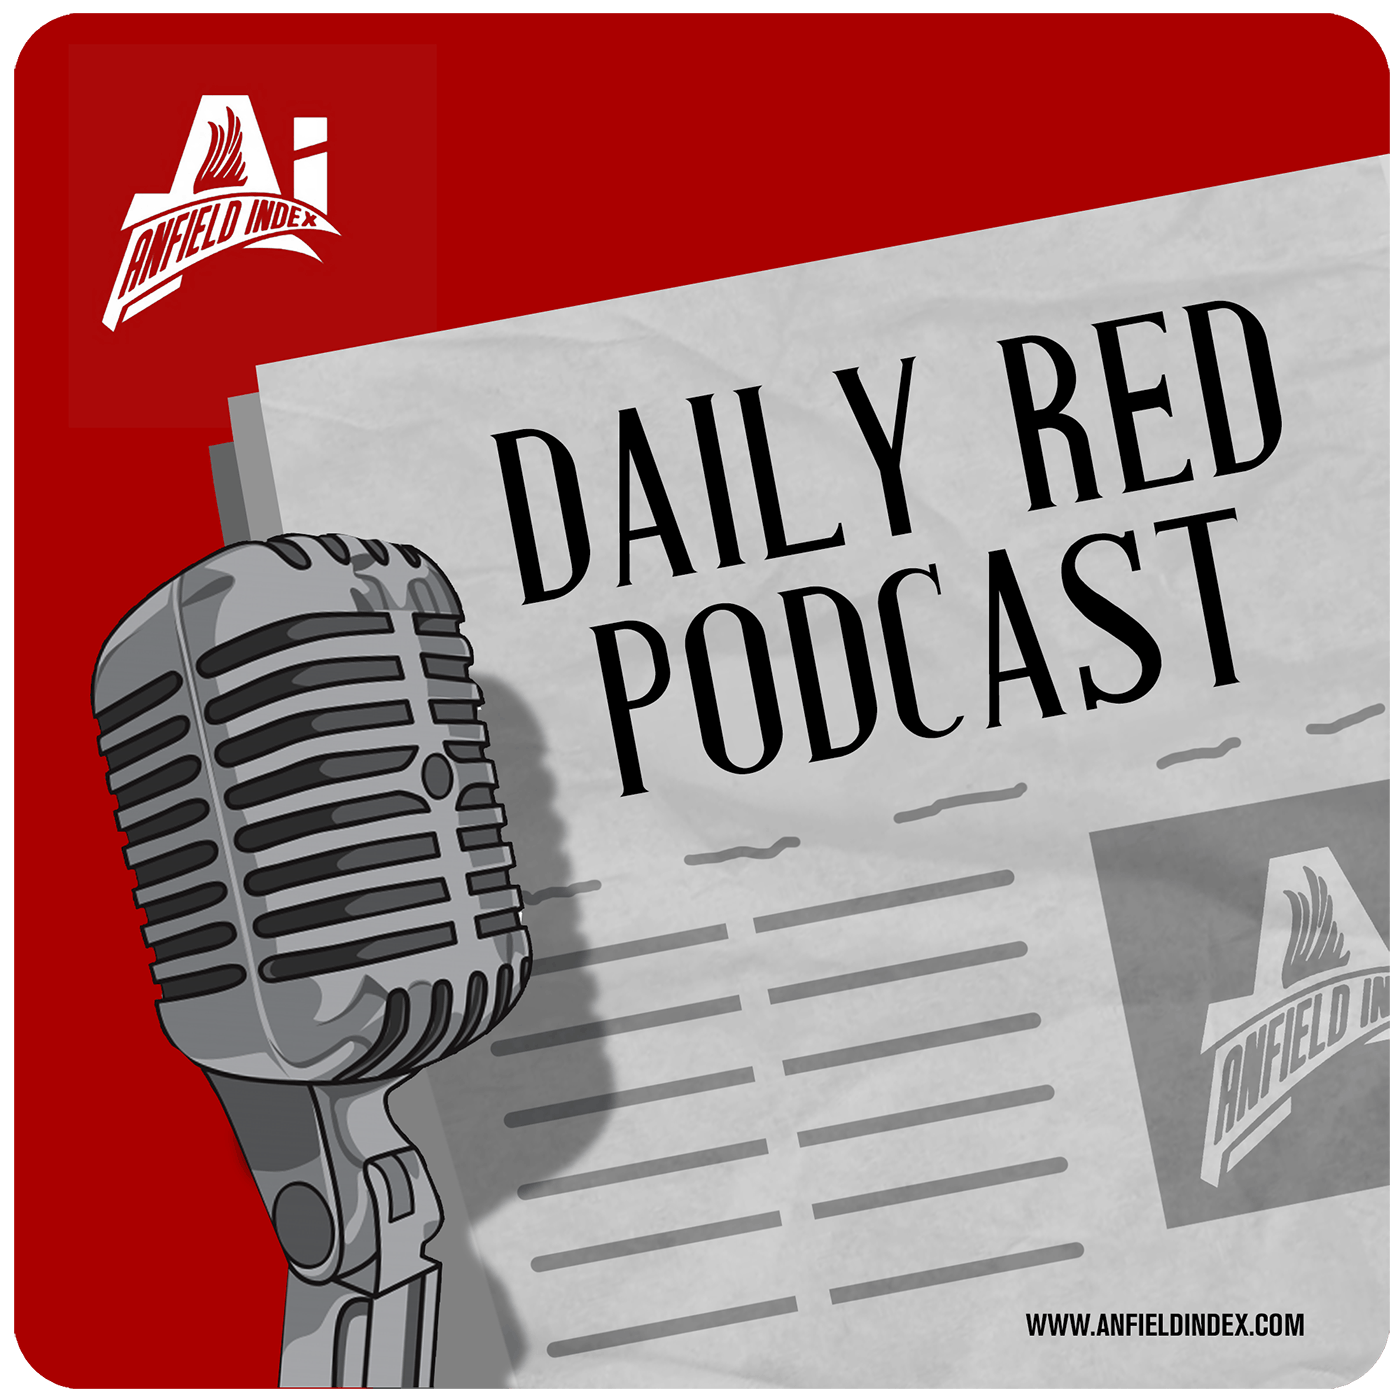 Tears Everywhere! - Daily Red Podcast